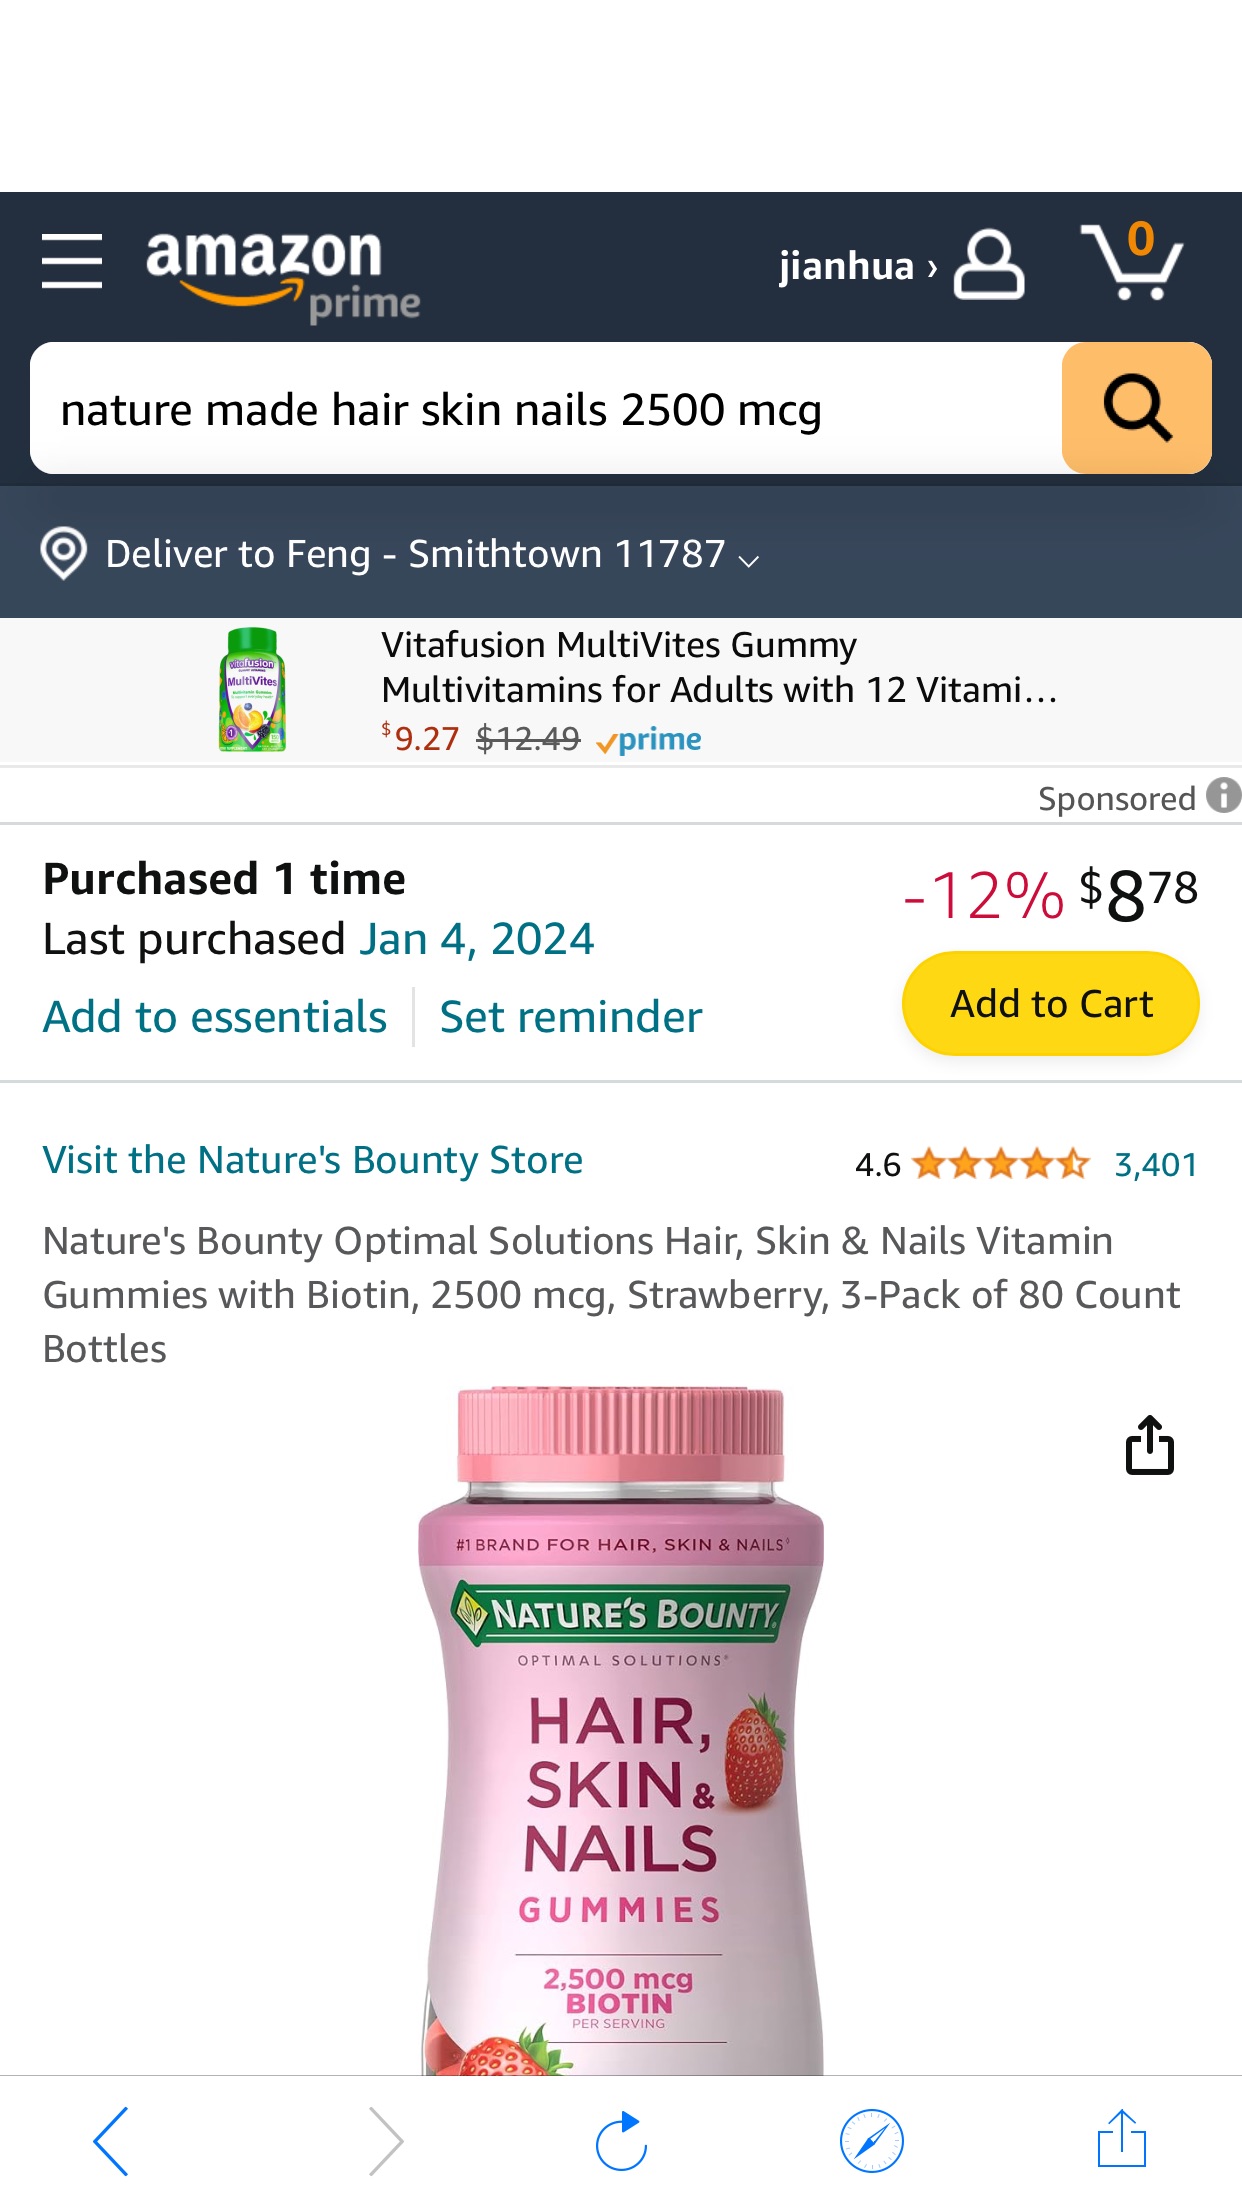 Amazon.com: Nature's Bounty Optimal Solutions Hair, Skin & Nails Vitamin Gummies with Biotin, 2500 mcg, Strawberry, 3-Pack of 80 Count Bottles : Health & Household